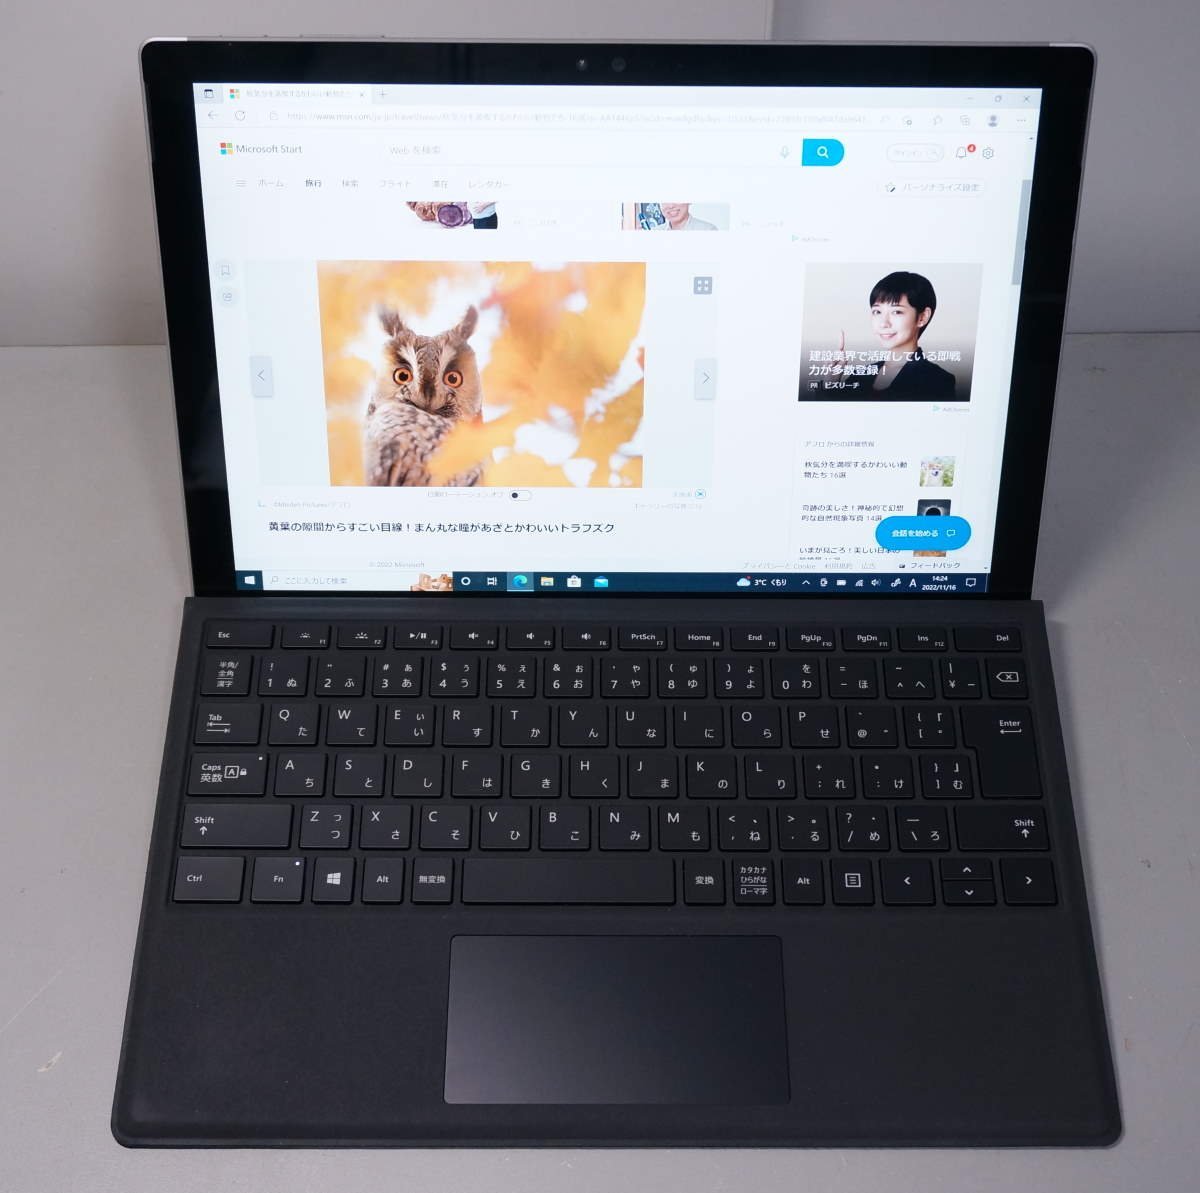 Microsoft Surface Pro 4 Core m3-6Y30/4GBRAM/128GBSSD/Win10 キーボード付き 2in1タブレット